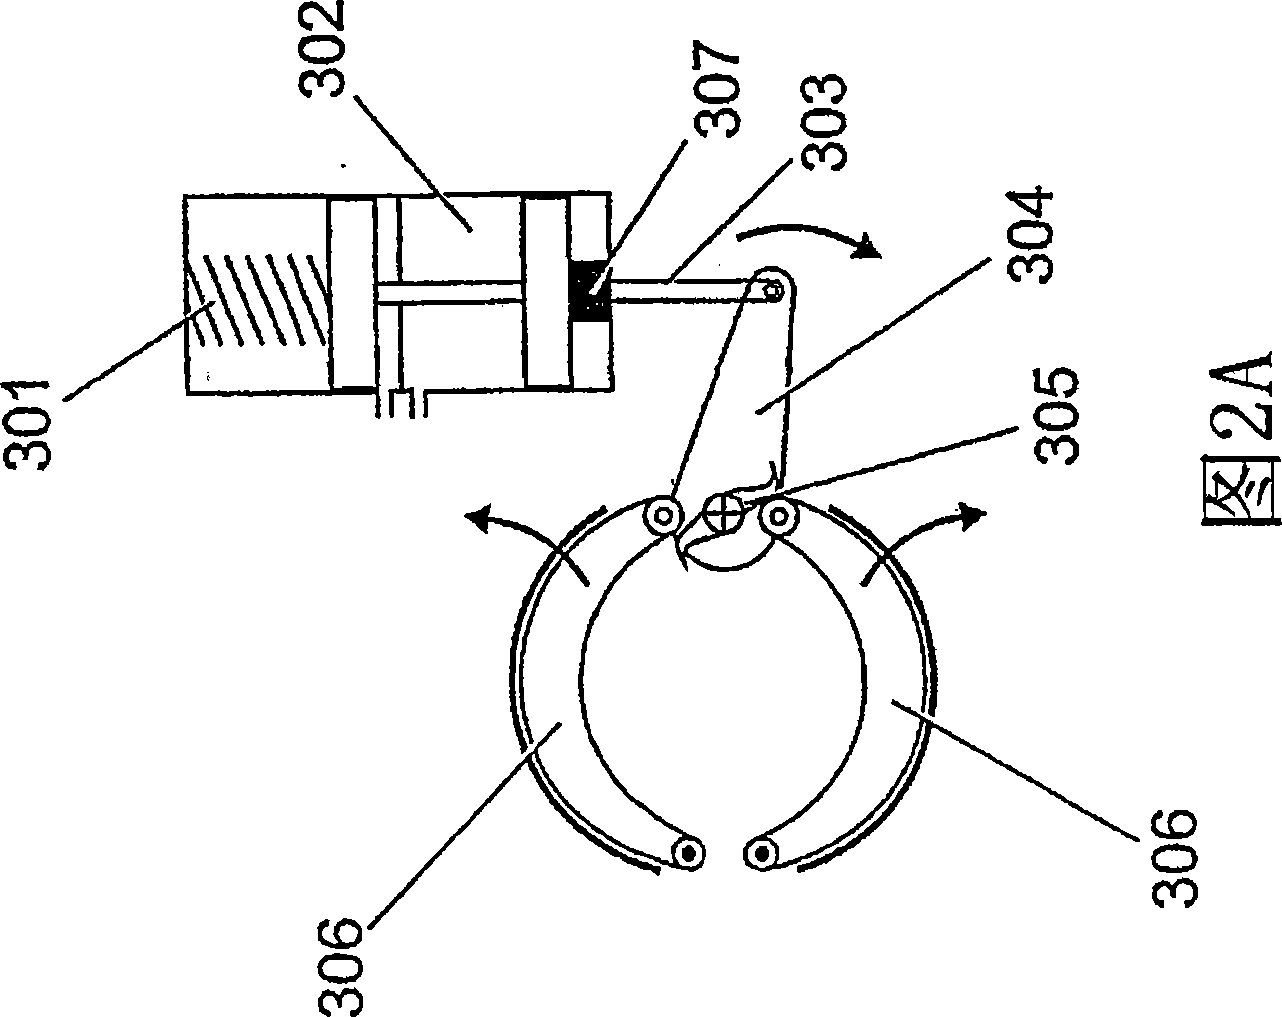 A system for automatically actuating the parking brake on a vehicle